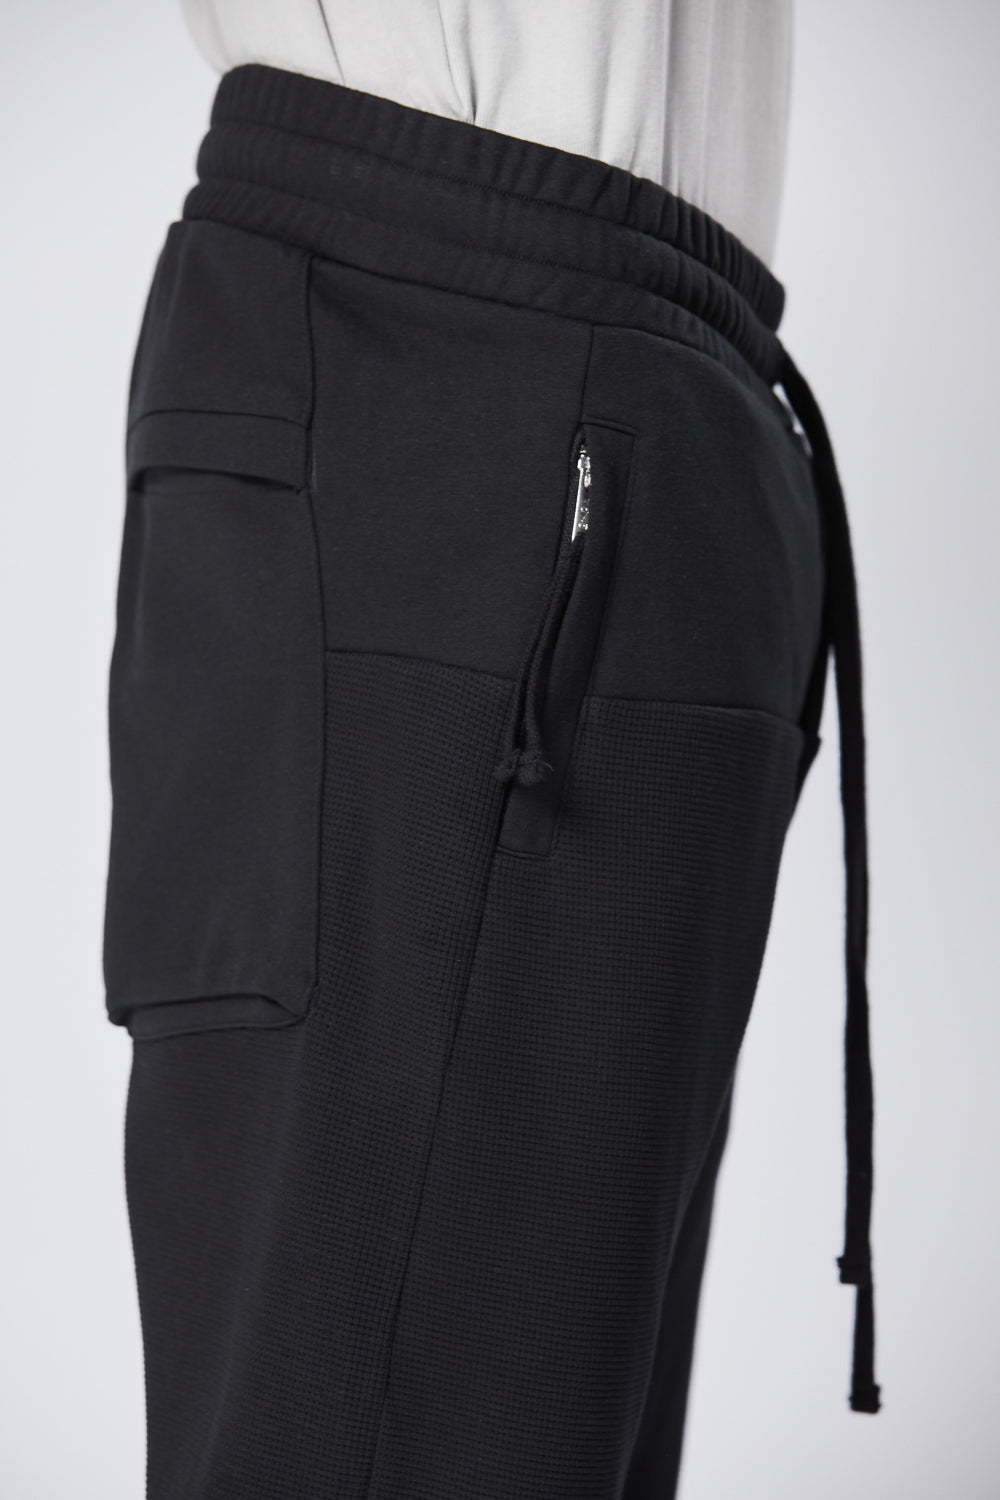 Buy the Thom Krom M ST 438 Sweatpants in Black at Intro. Spend £50 for free UK delivery. Official stockists. We ship worldwide.